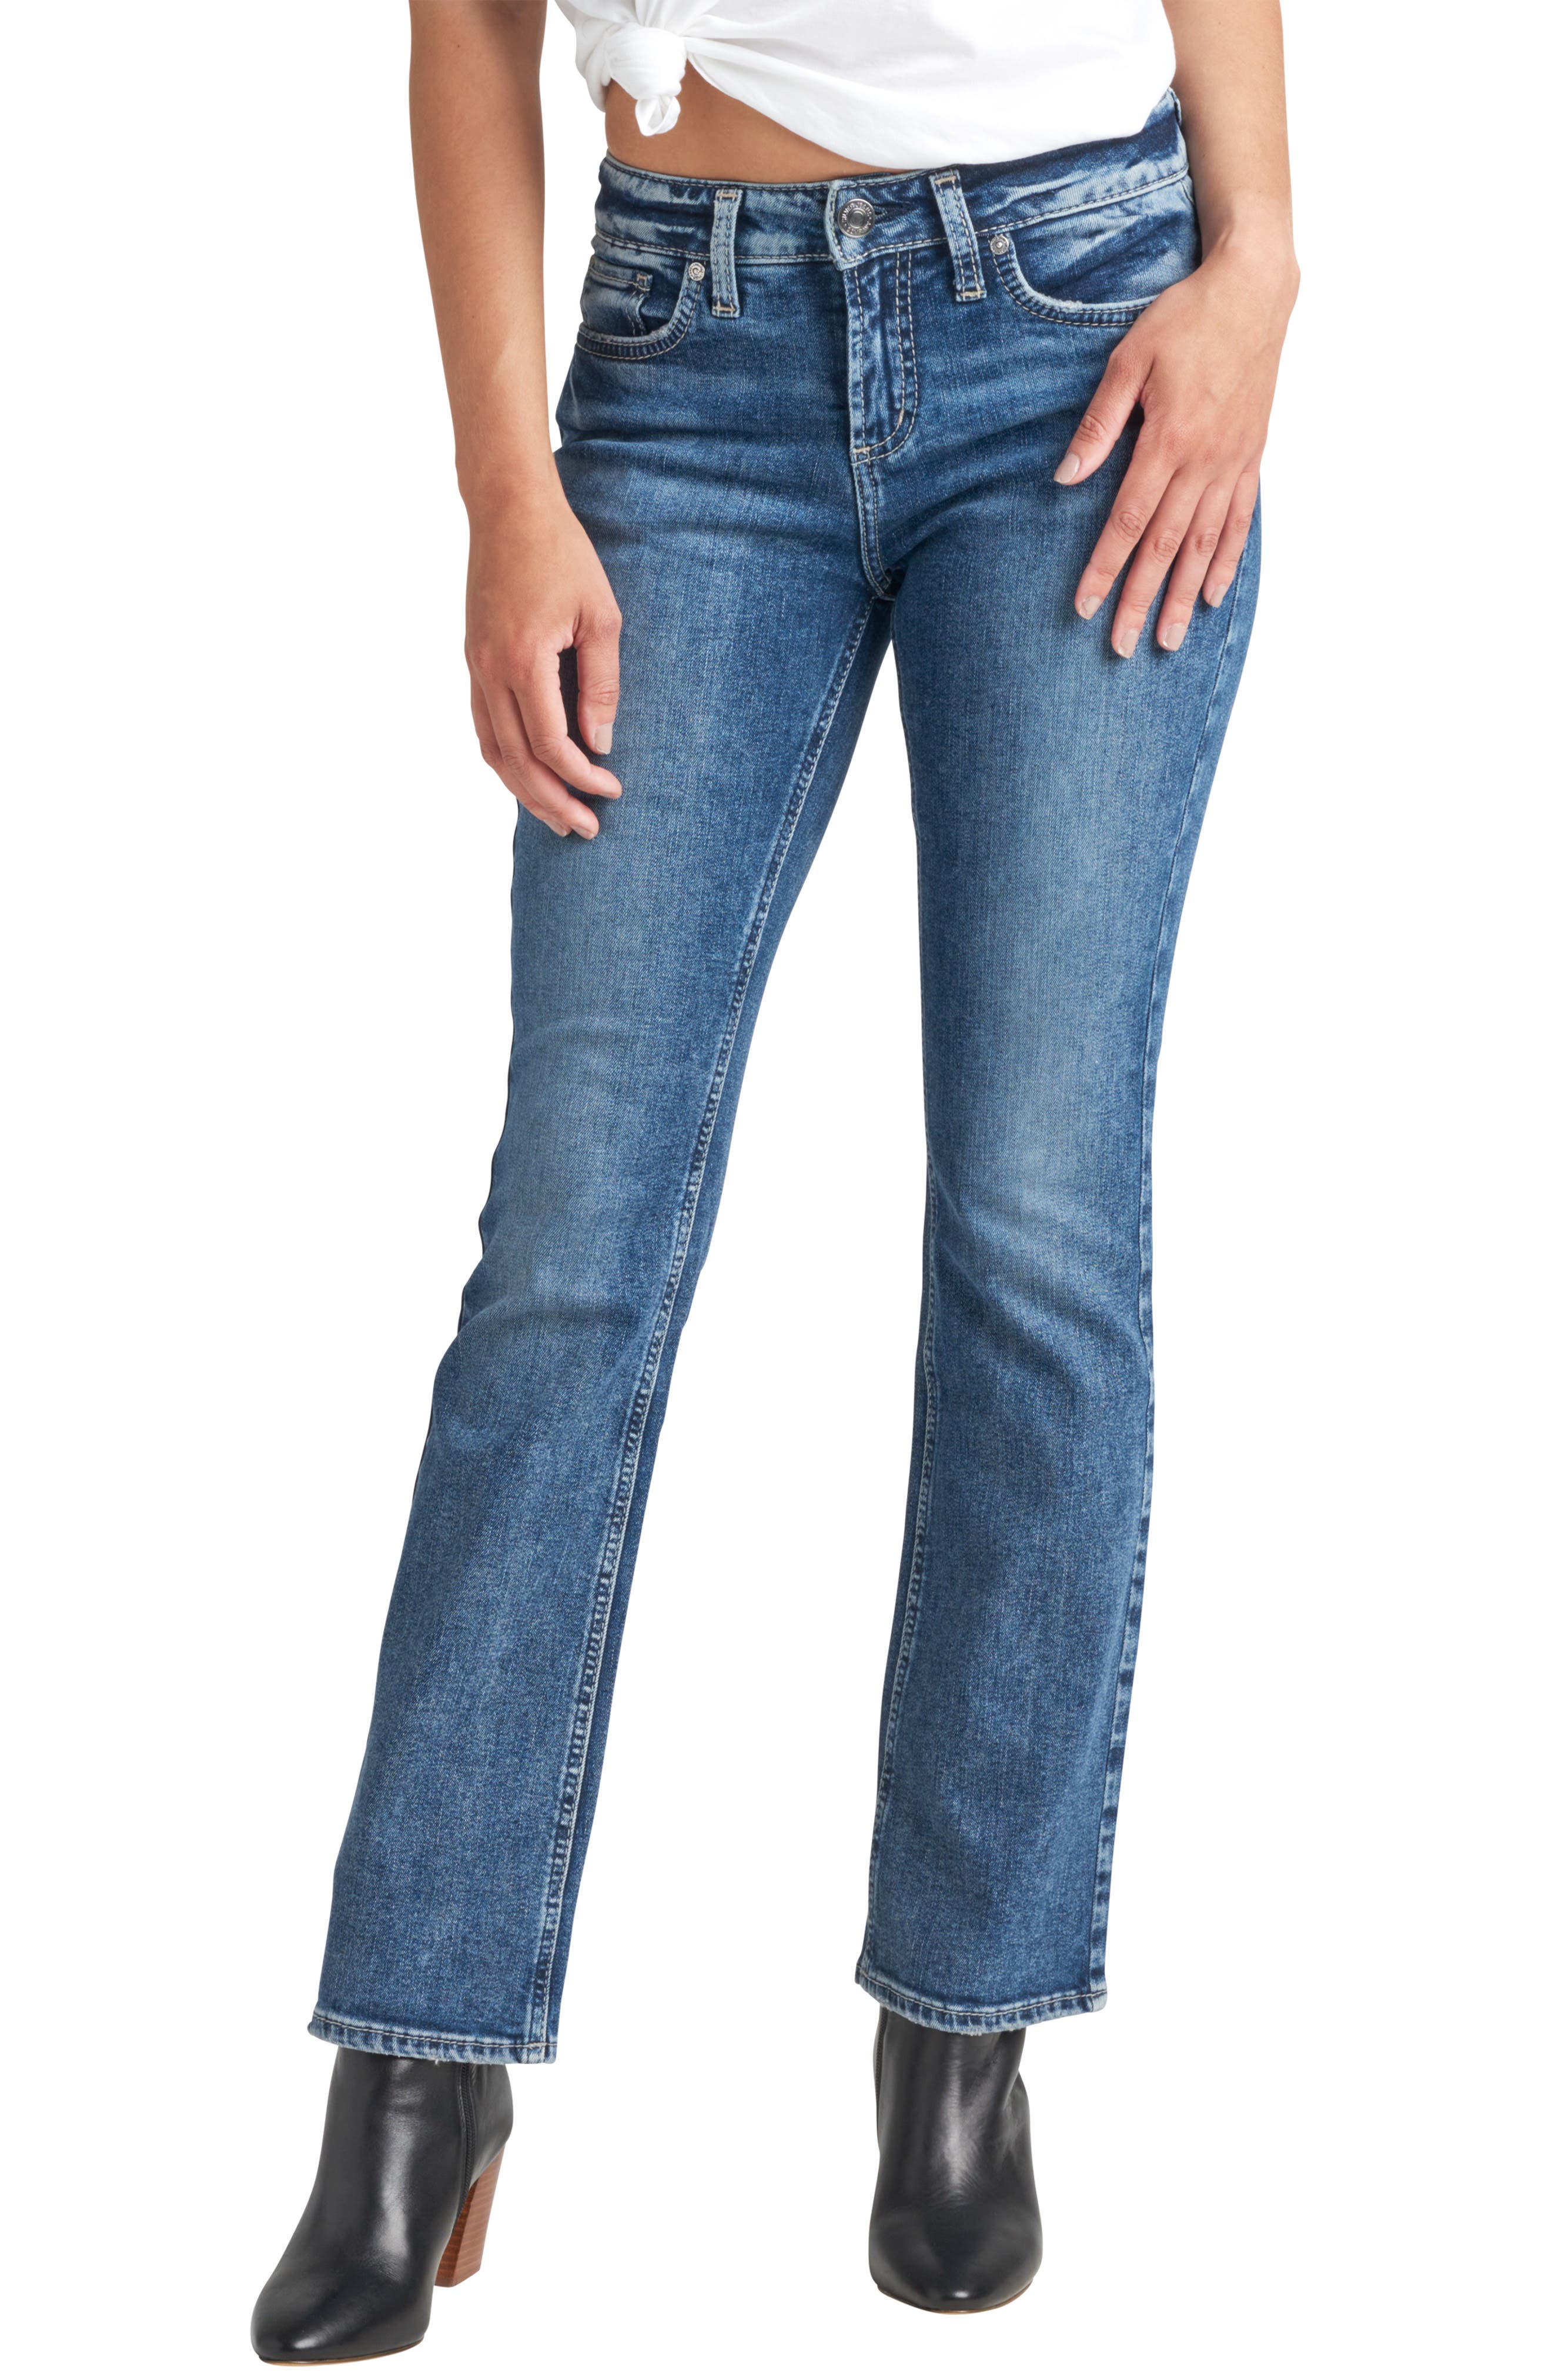 Silver Jeans Co. Elyse Slim Bootcut Jeans in Indigo